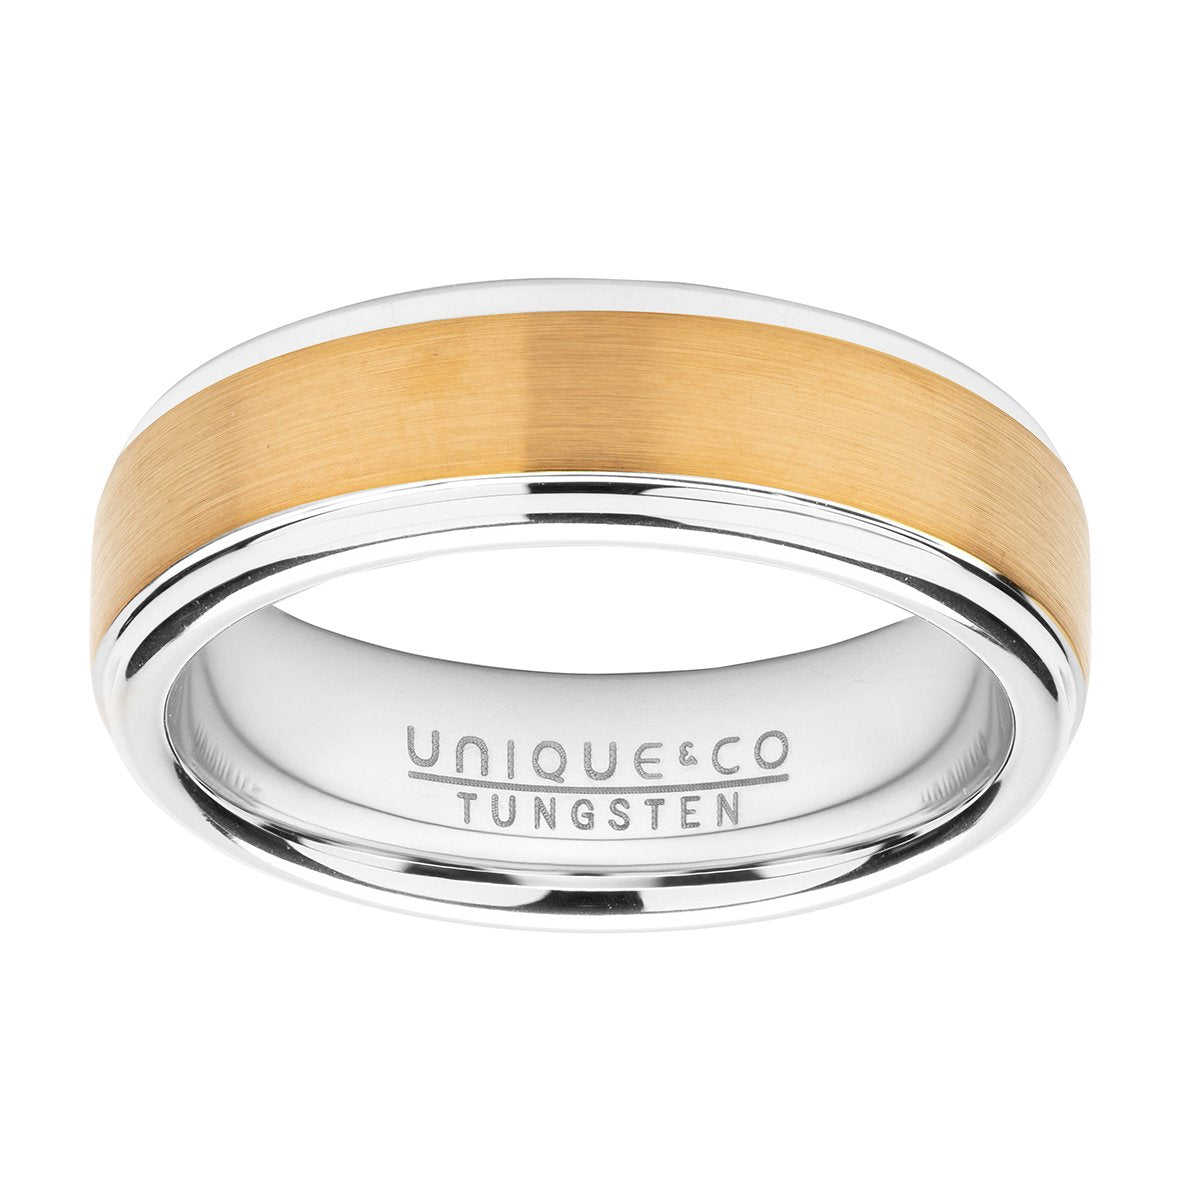 Tungsten 7mm Gold IP Plated Gents Wedding Ring (Tur121)